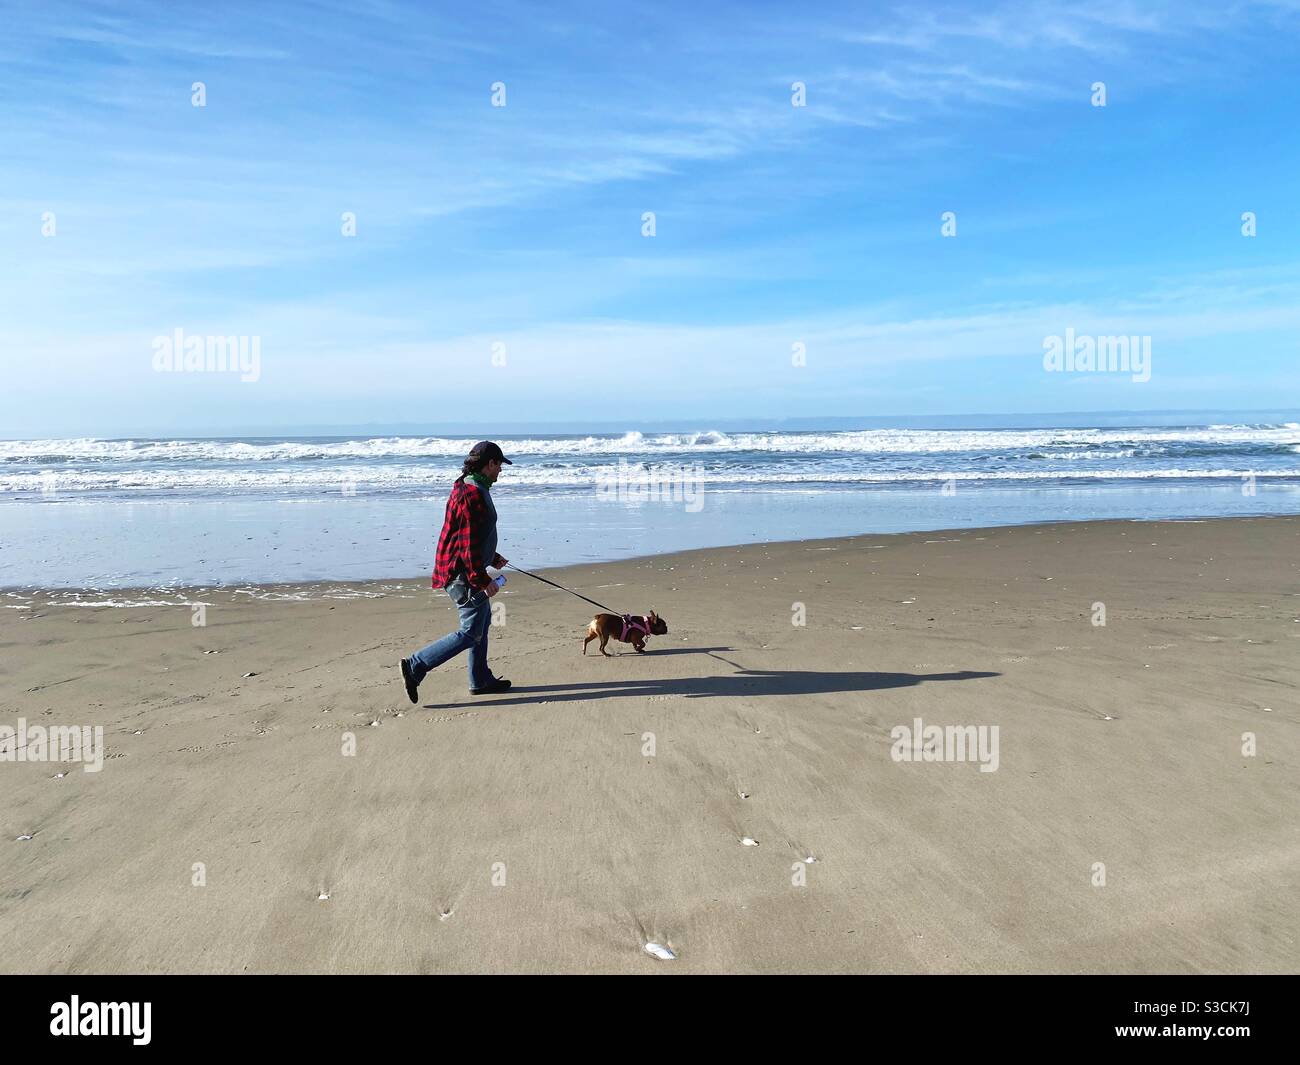 A man and small dog walking on an empty beach. Stock Photo